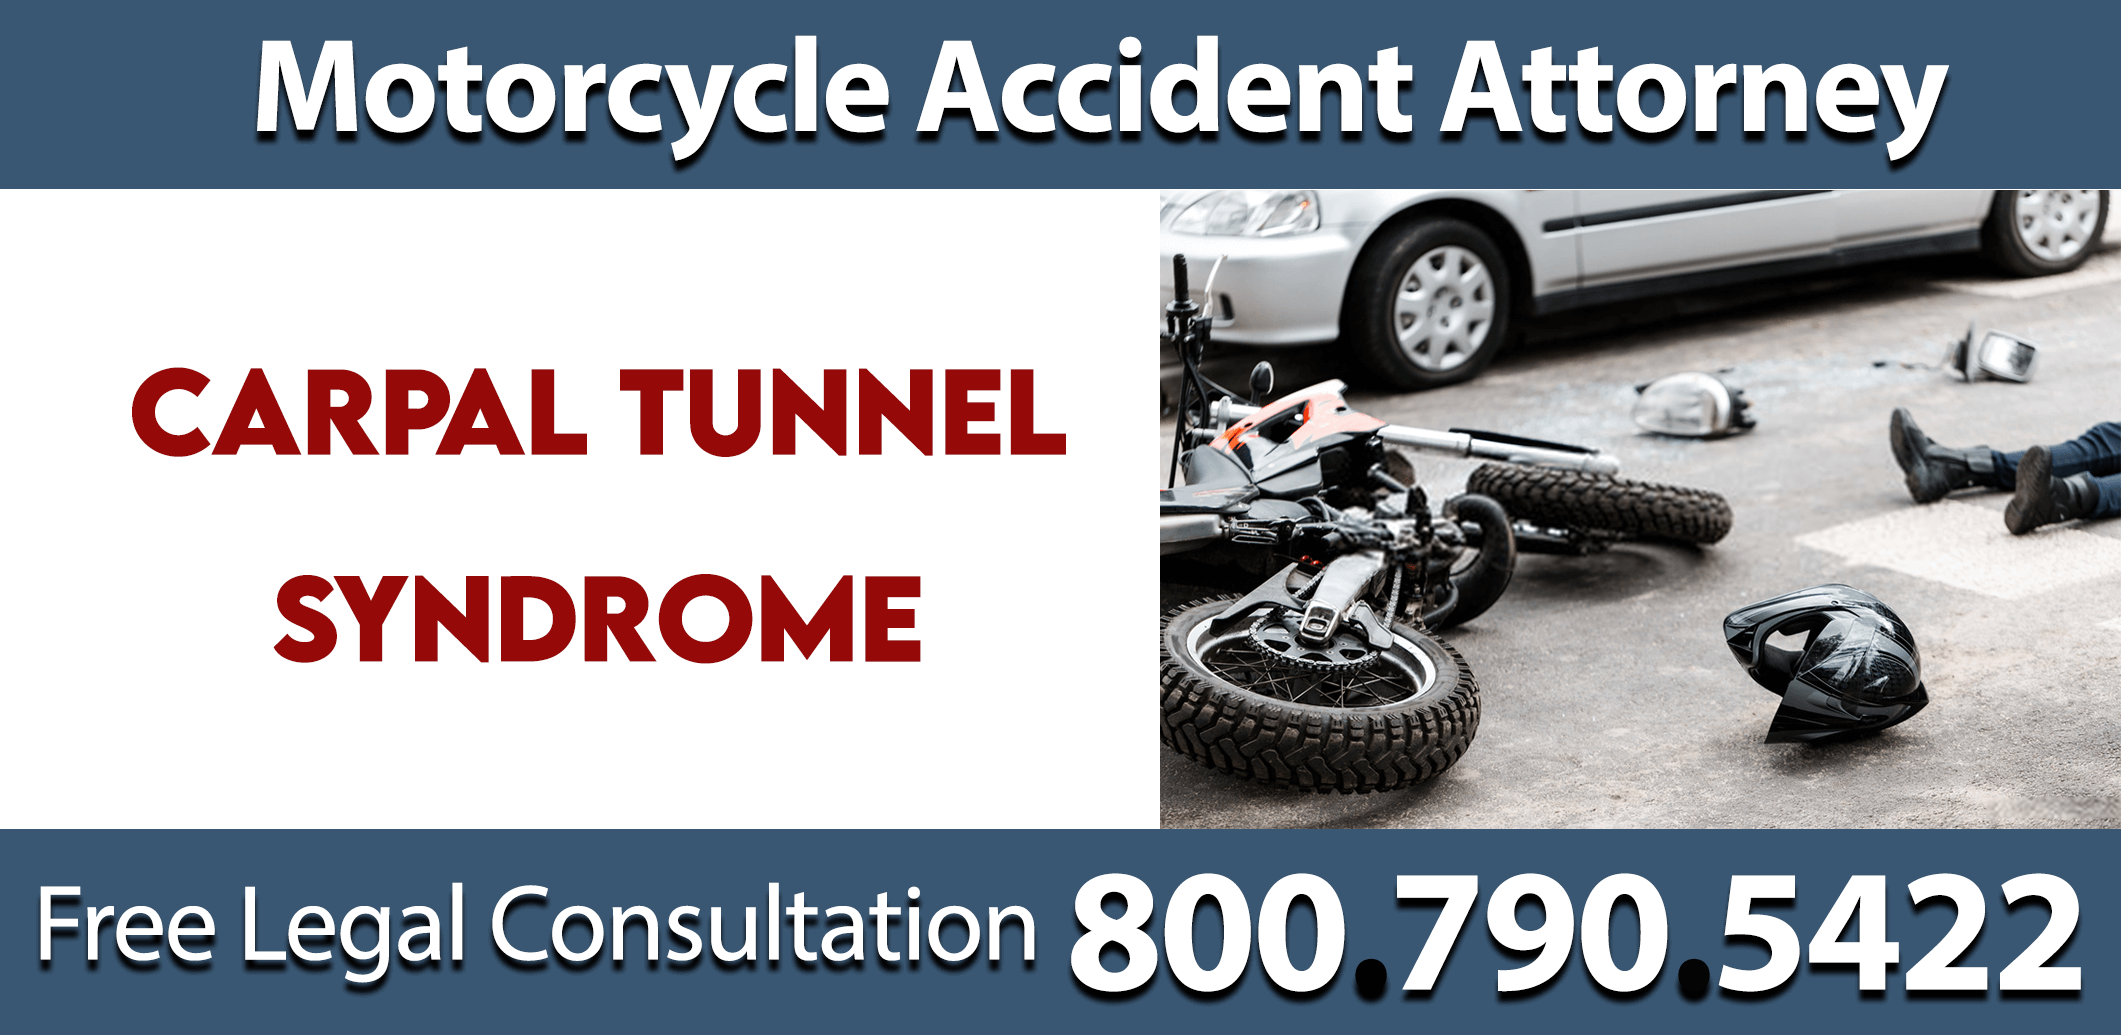 motorcycle accident carpal tunnel syndrome liability compensation medical lawsuit surgery personal injury lawsuit.